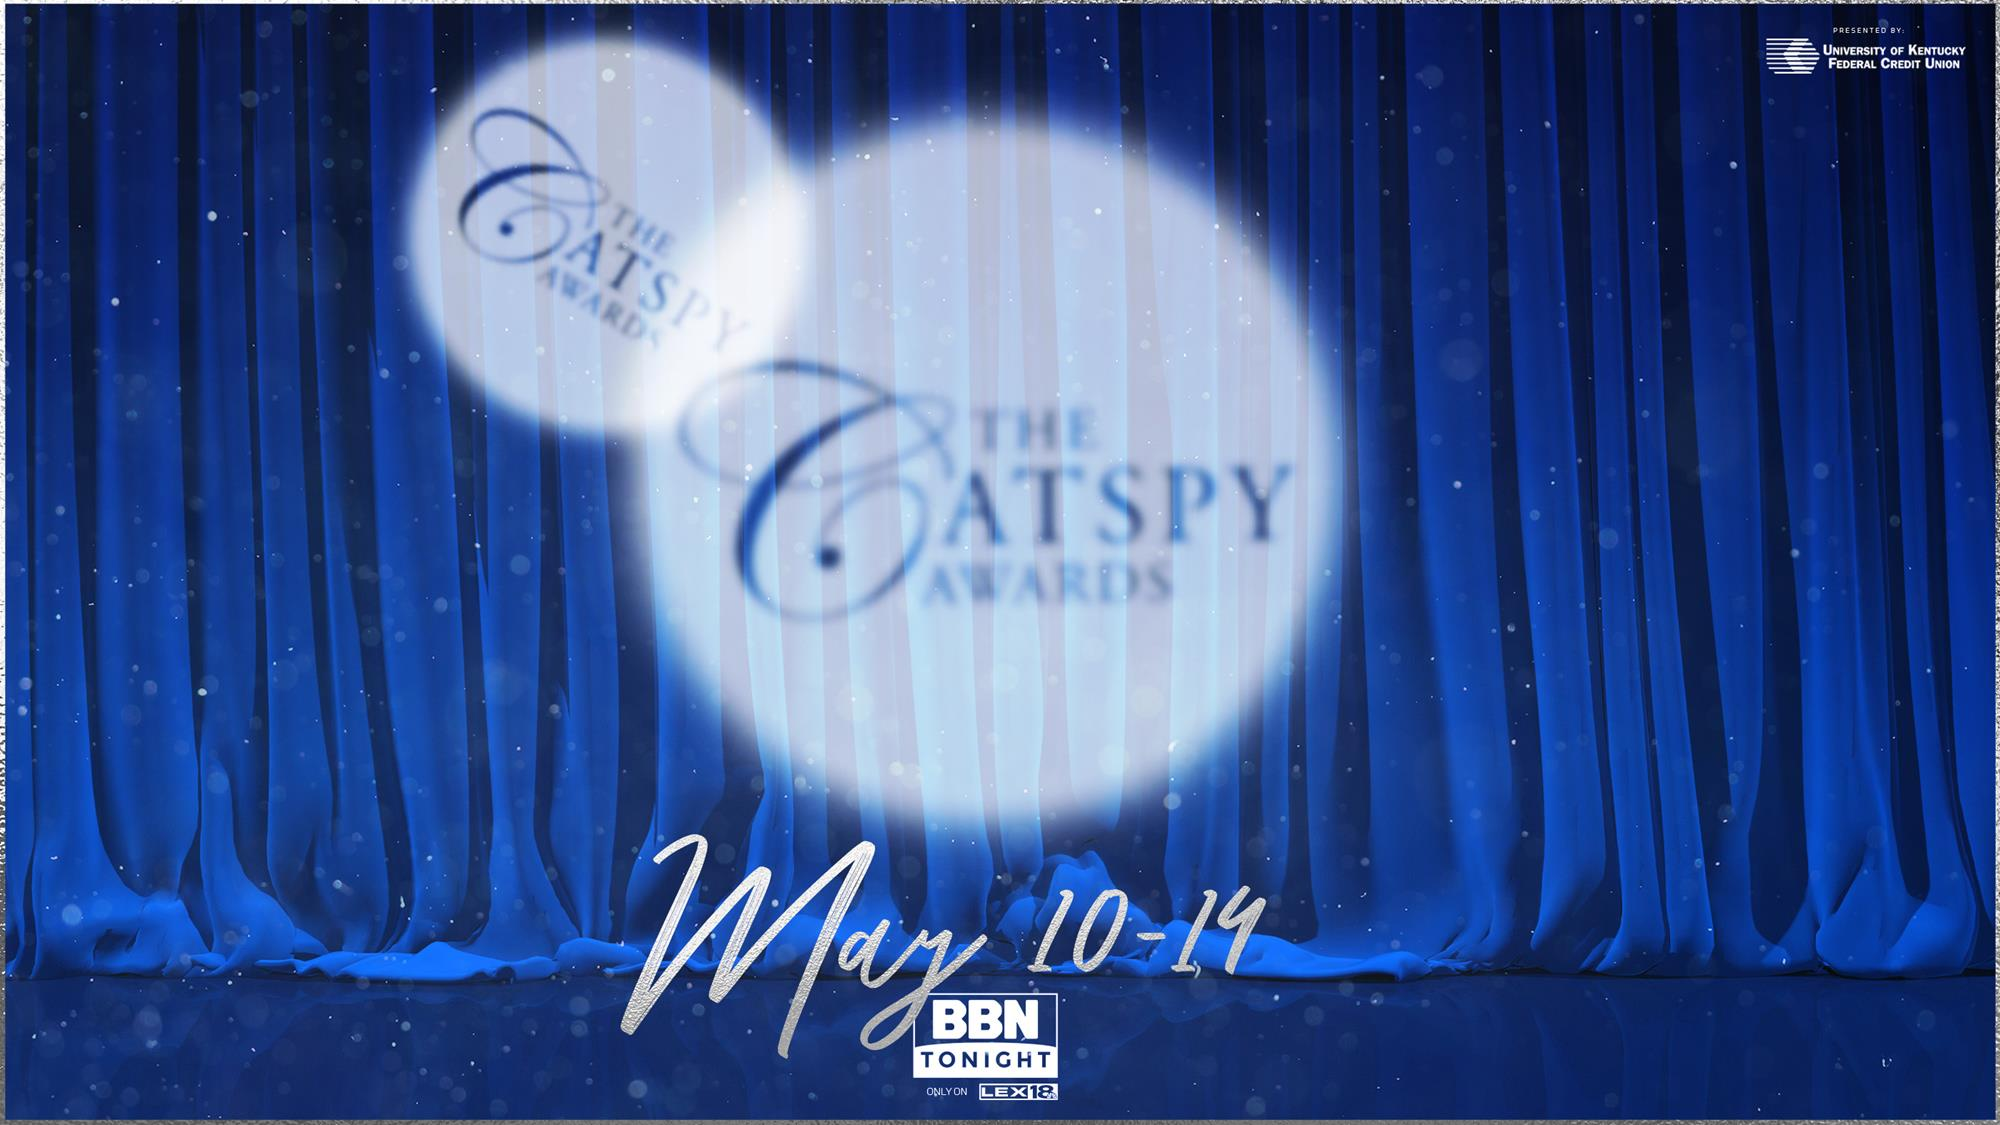 78 Wildcats Honored with 2020-21 CATSPYs